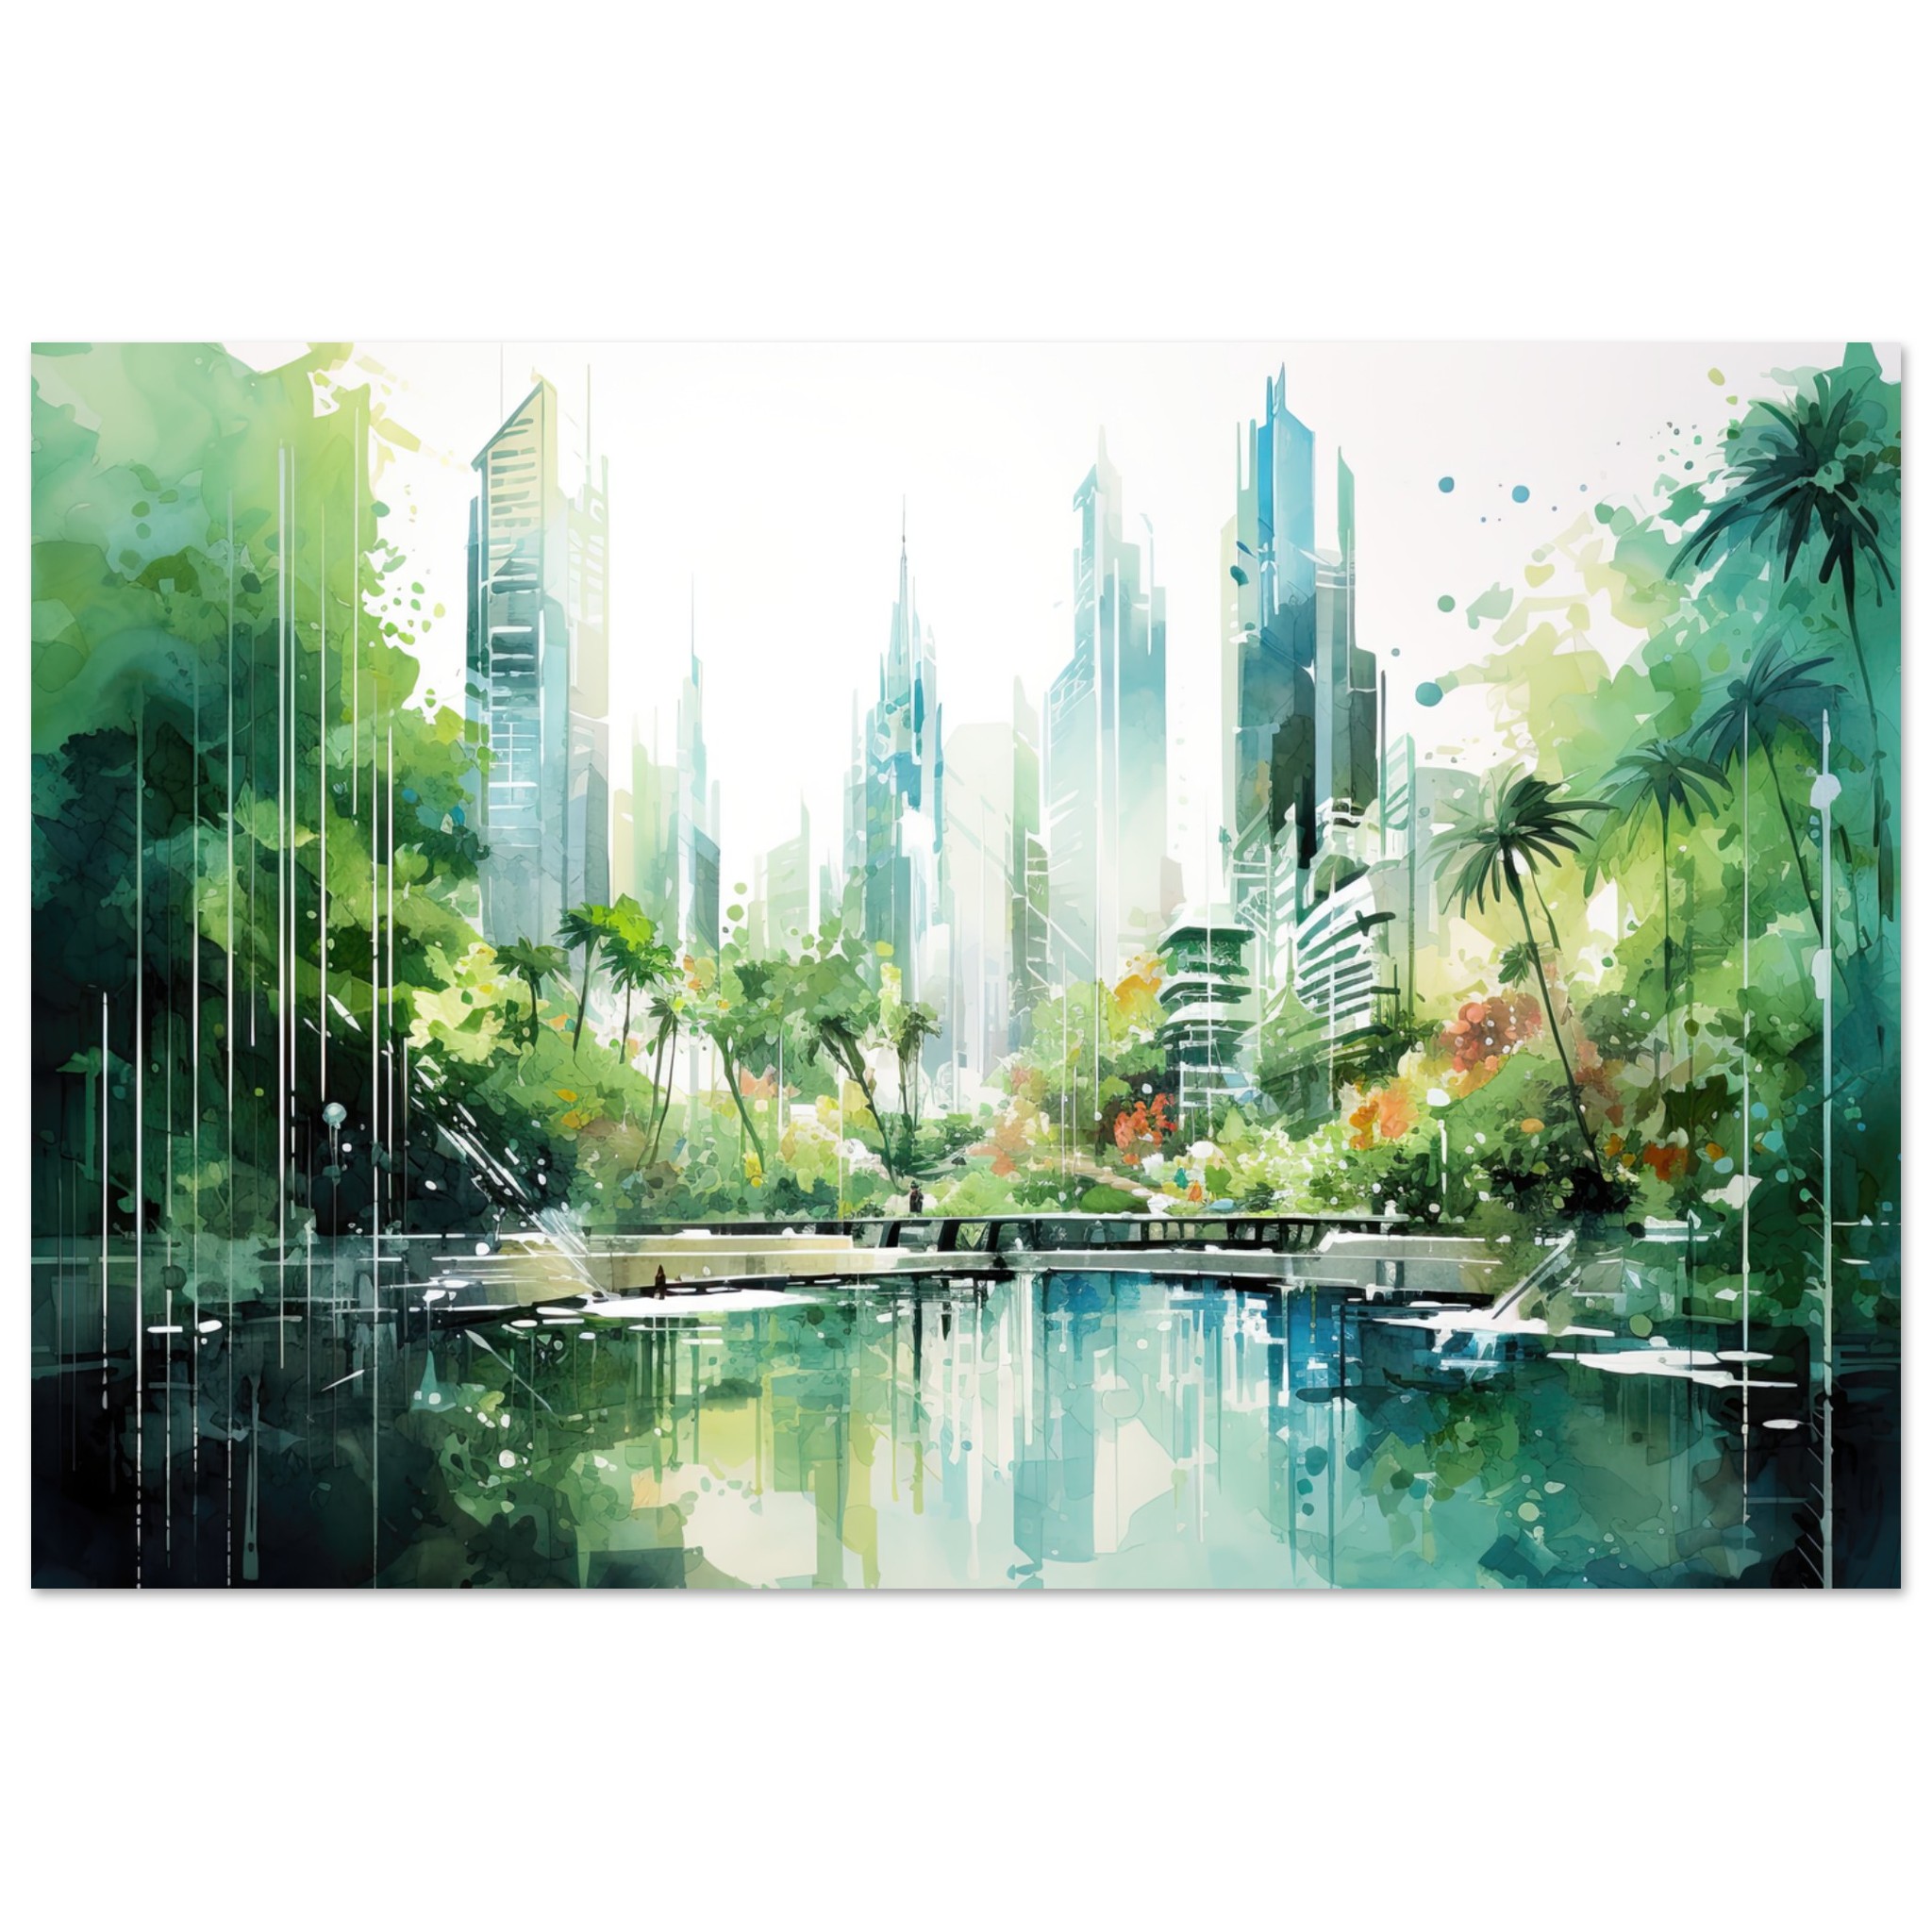 Rainy City Day Watercolor Poster – 40×60 cm / 16×24″